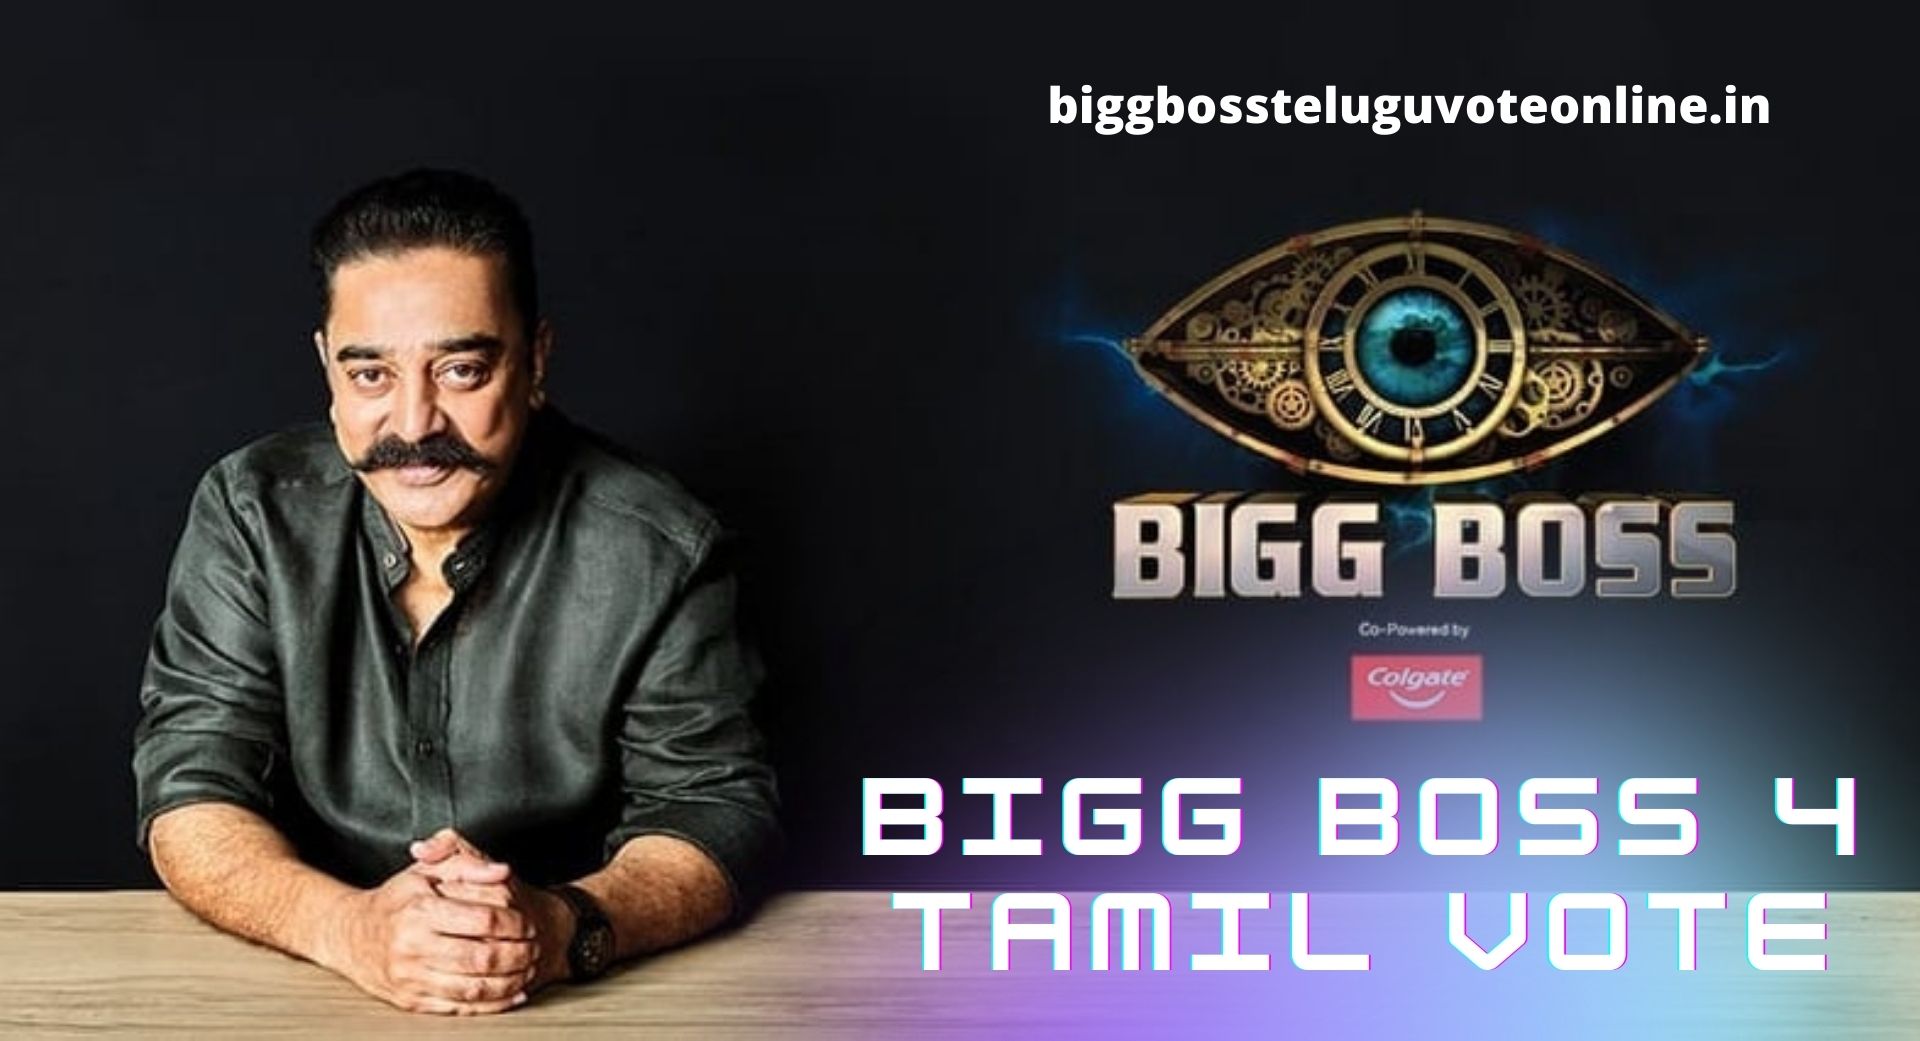 Bigg Boss 4 Tamil Vote Online Bb4 Tamil Voting Results A large number of people make choices on our site and thus you can get a thought of will's identity. bigg boss 4 tamil vote online bb4